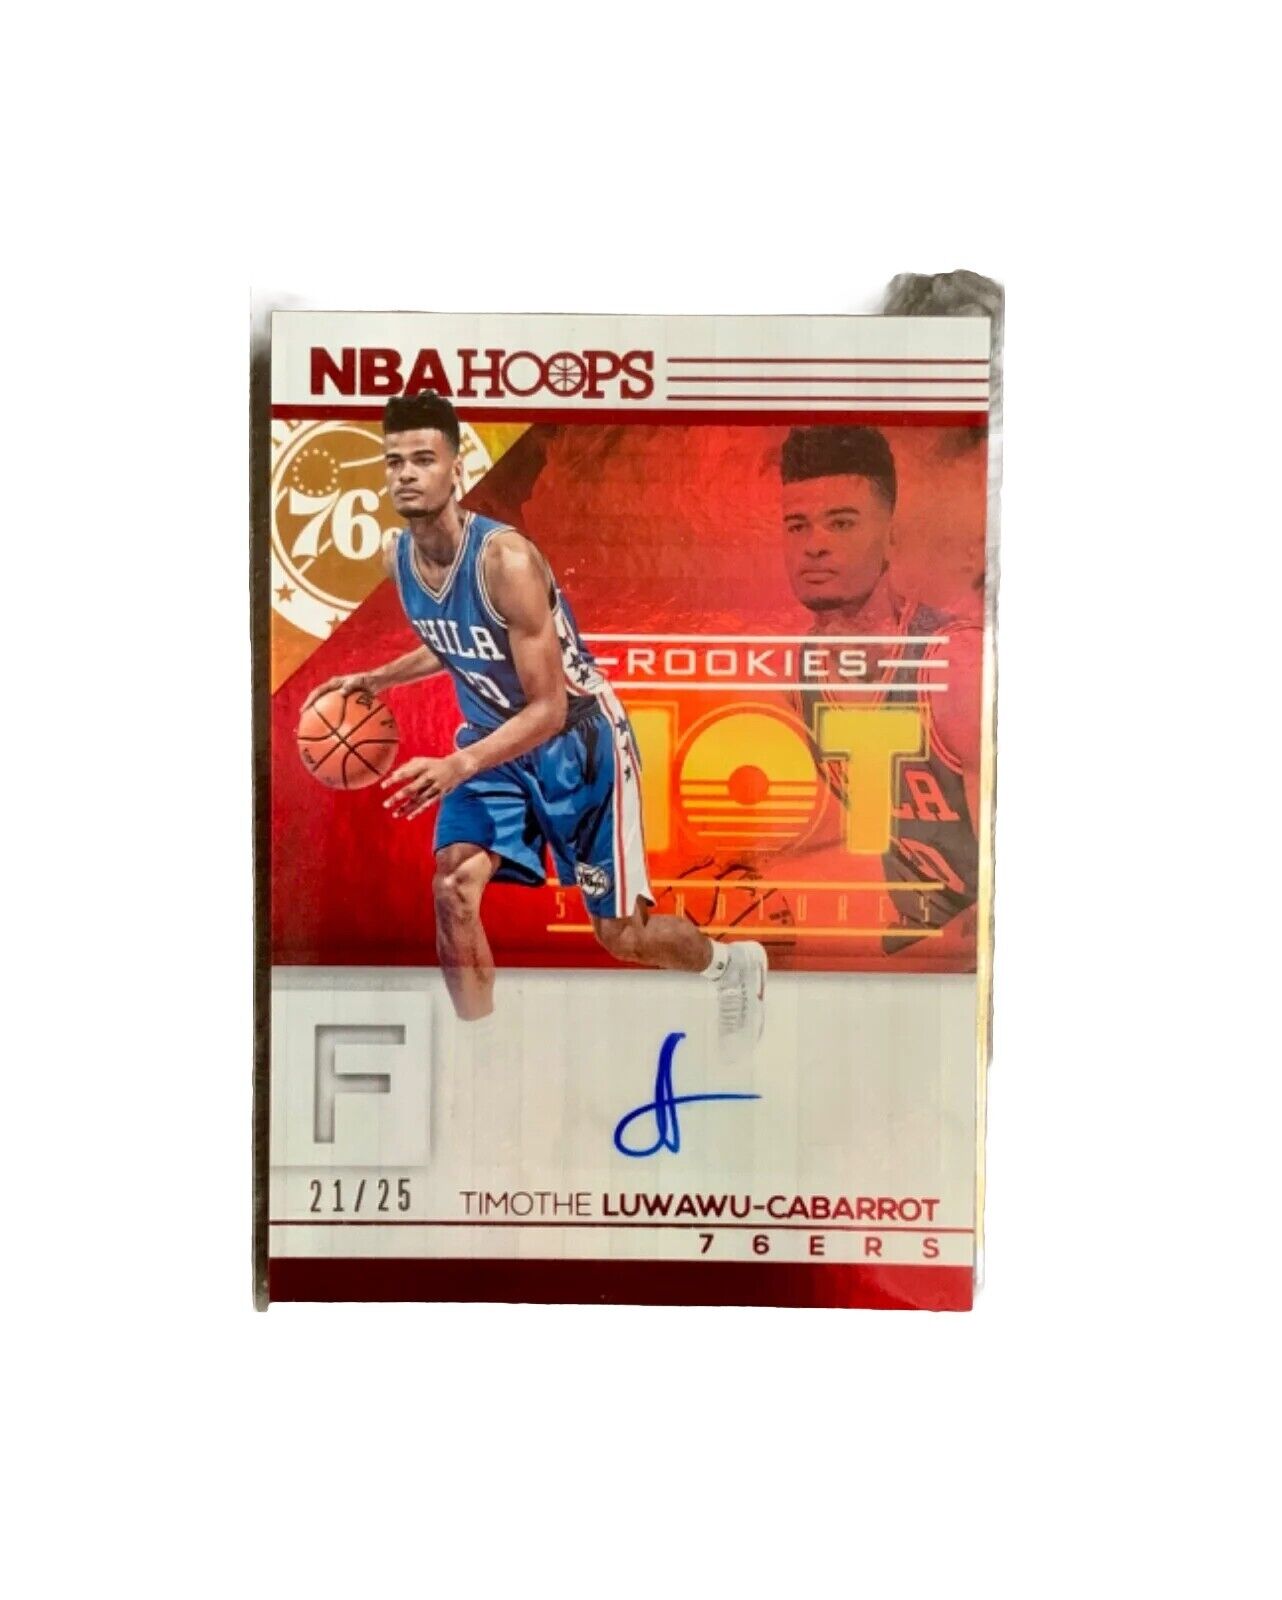 /25 LUWAWU-CABARROT 2016-17 Panini HOOPS Rookie RED HOT SIGNATURE CAR RC Sixers